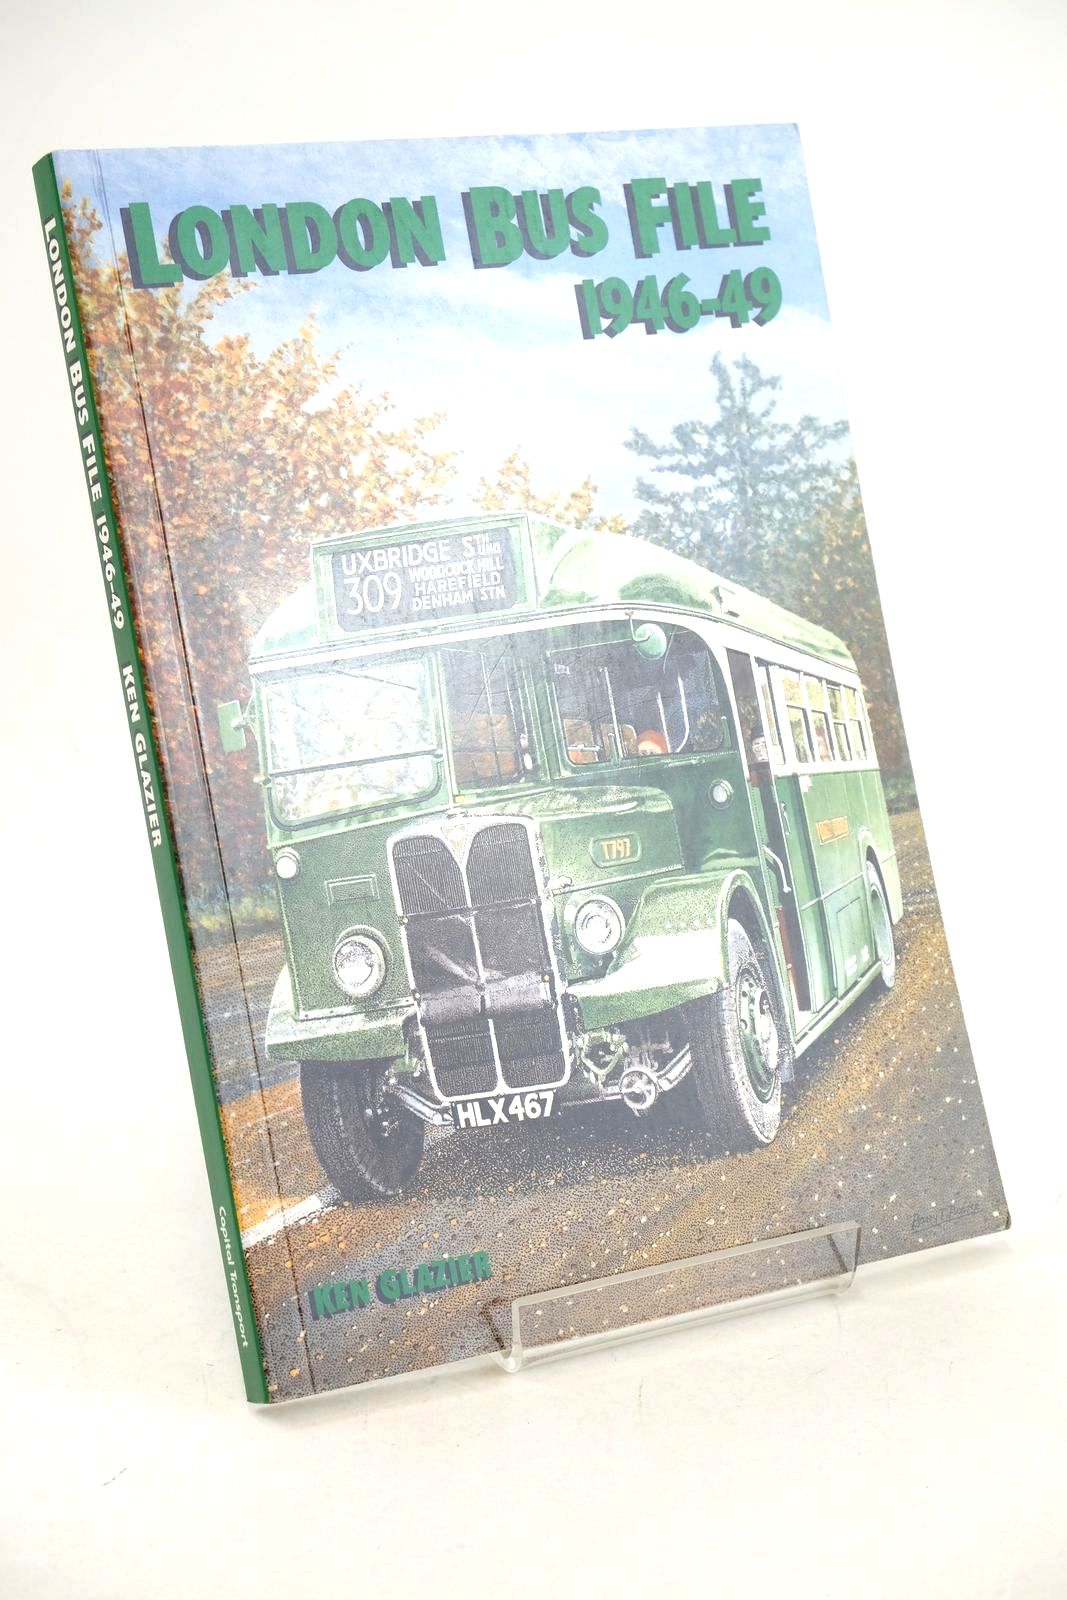 Photo of LONDON BUS FILE 1946-49 written by Glazier, Ken published by Capital Transport (STOCK CODE: 1326931)  for sale by Stella & Rose's Books